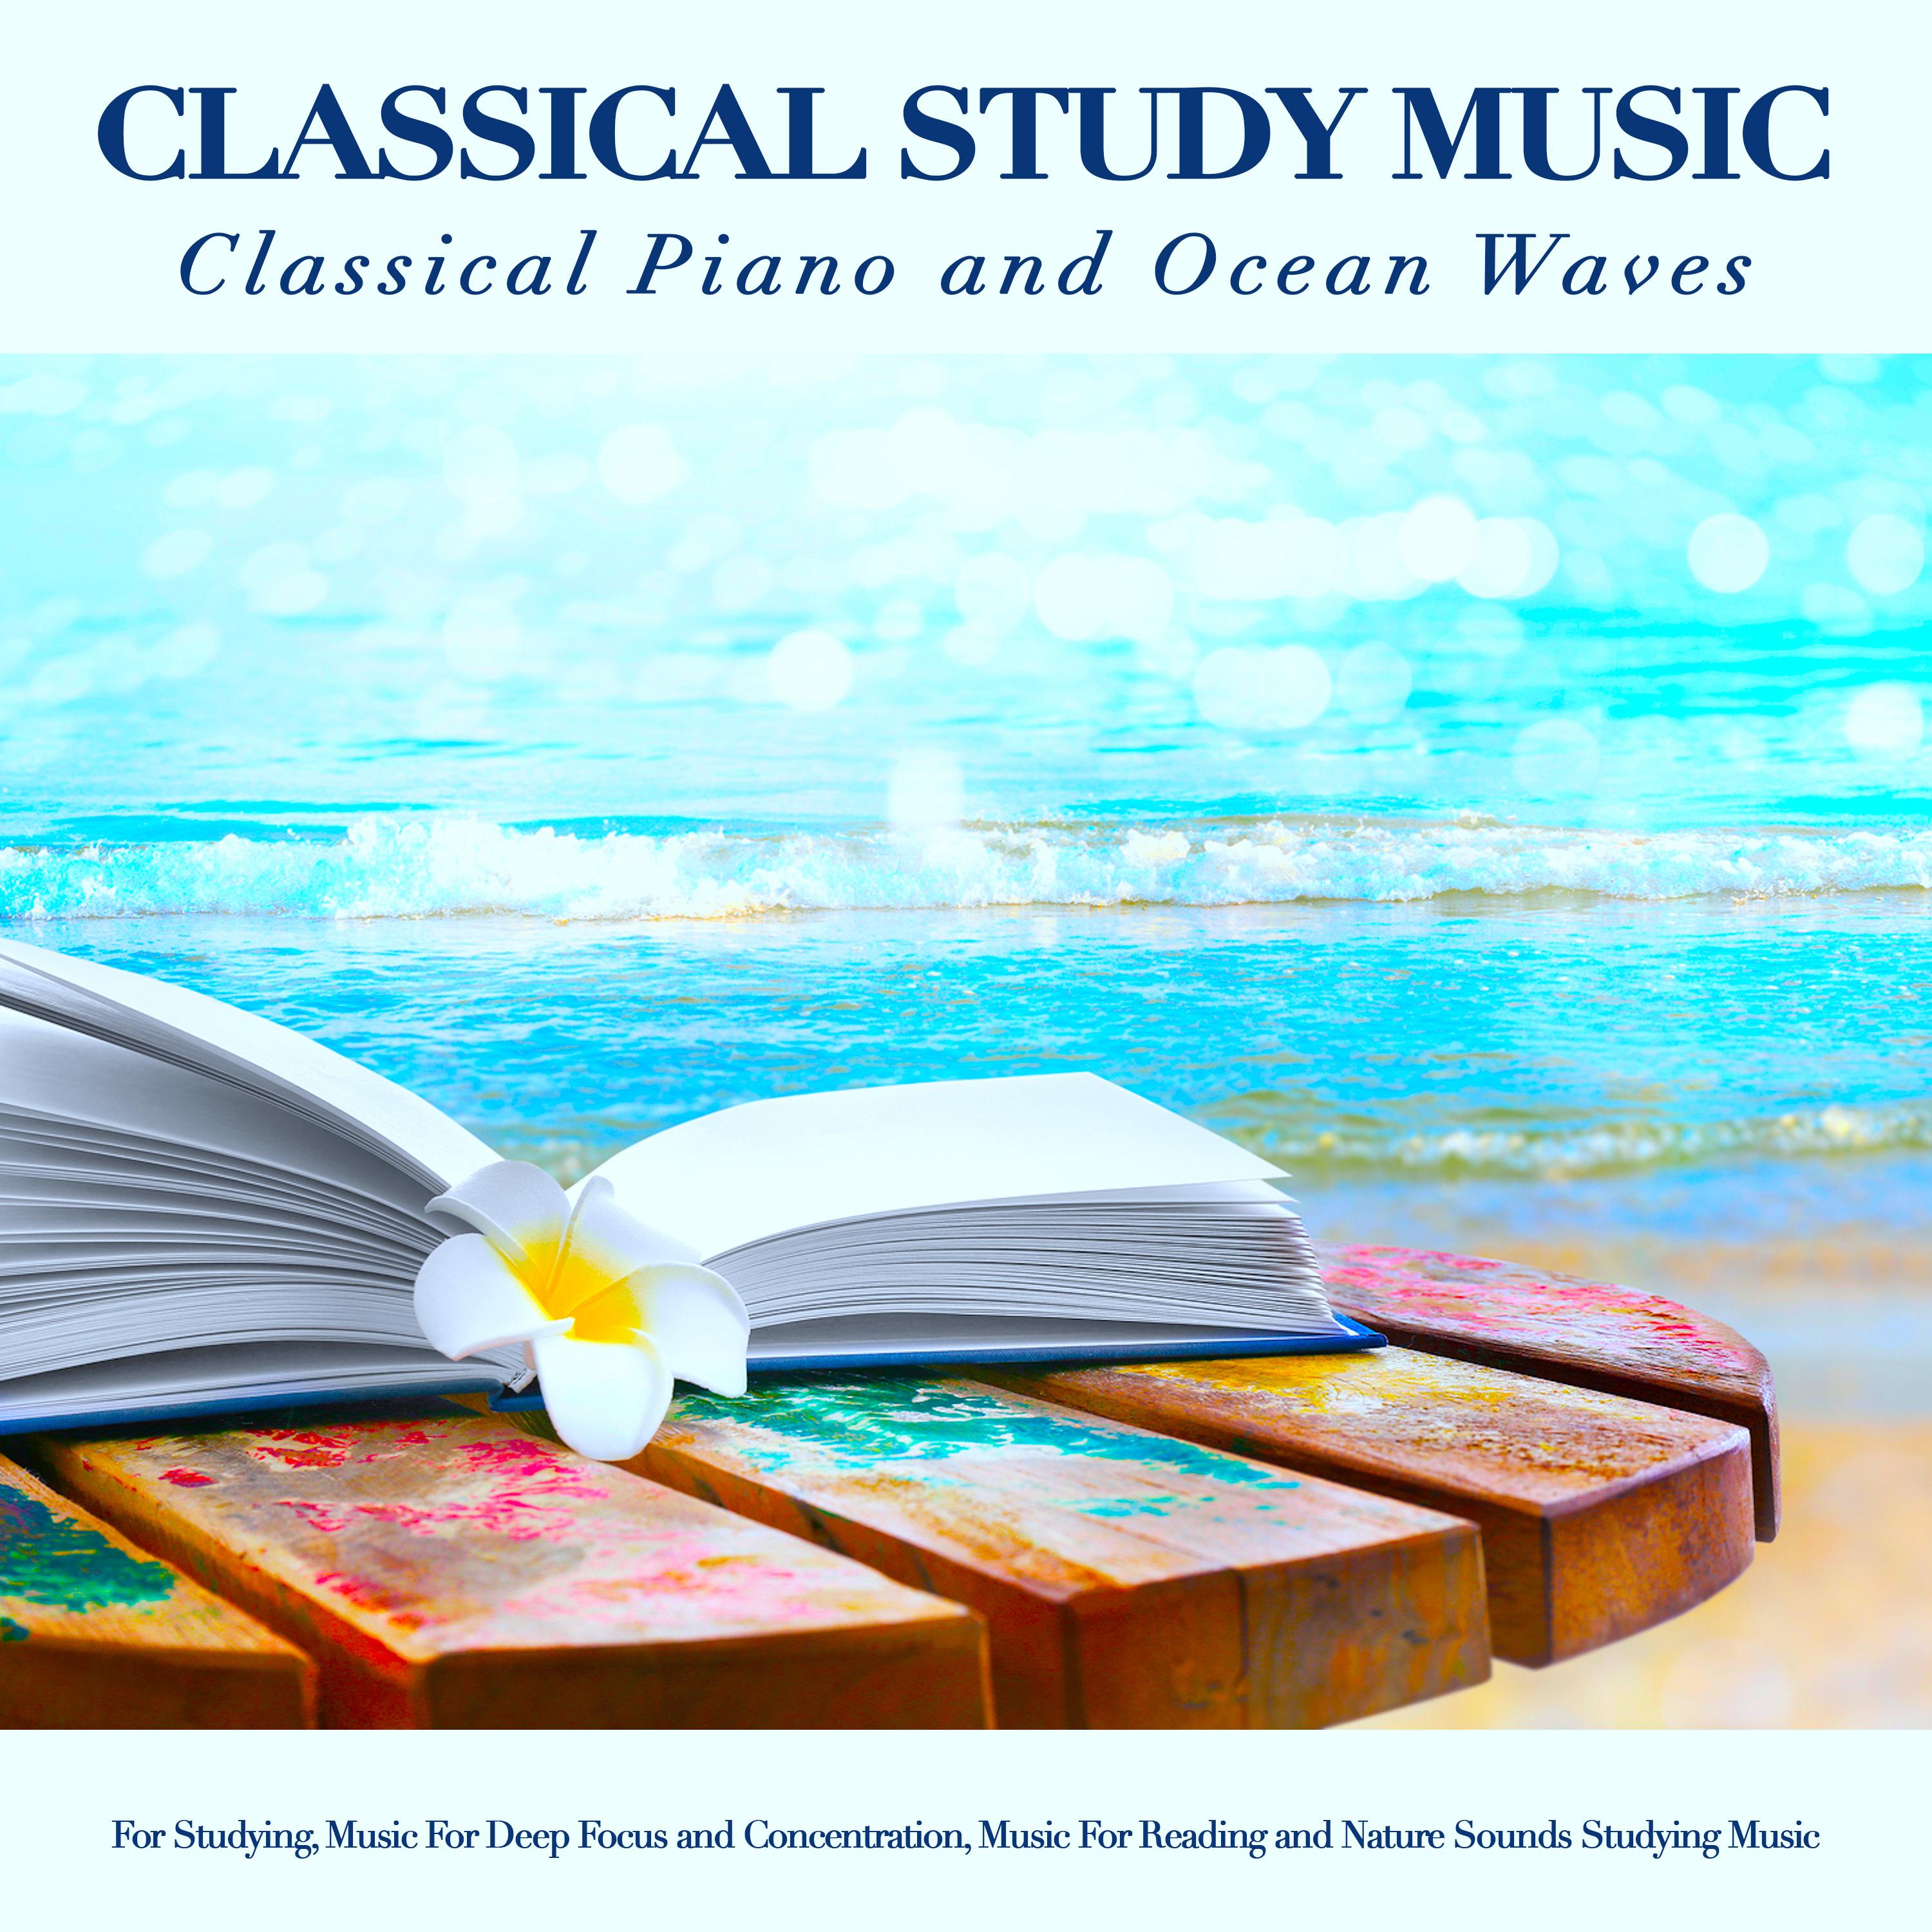 Fur Elise - Beethoven - Classical Study Music - Ocean Waves Sounds - Classical Piano for Studying